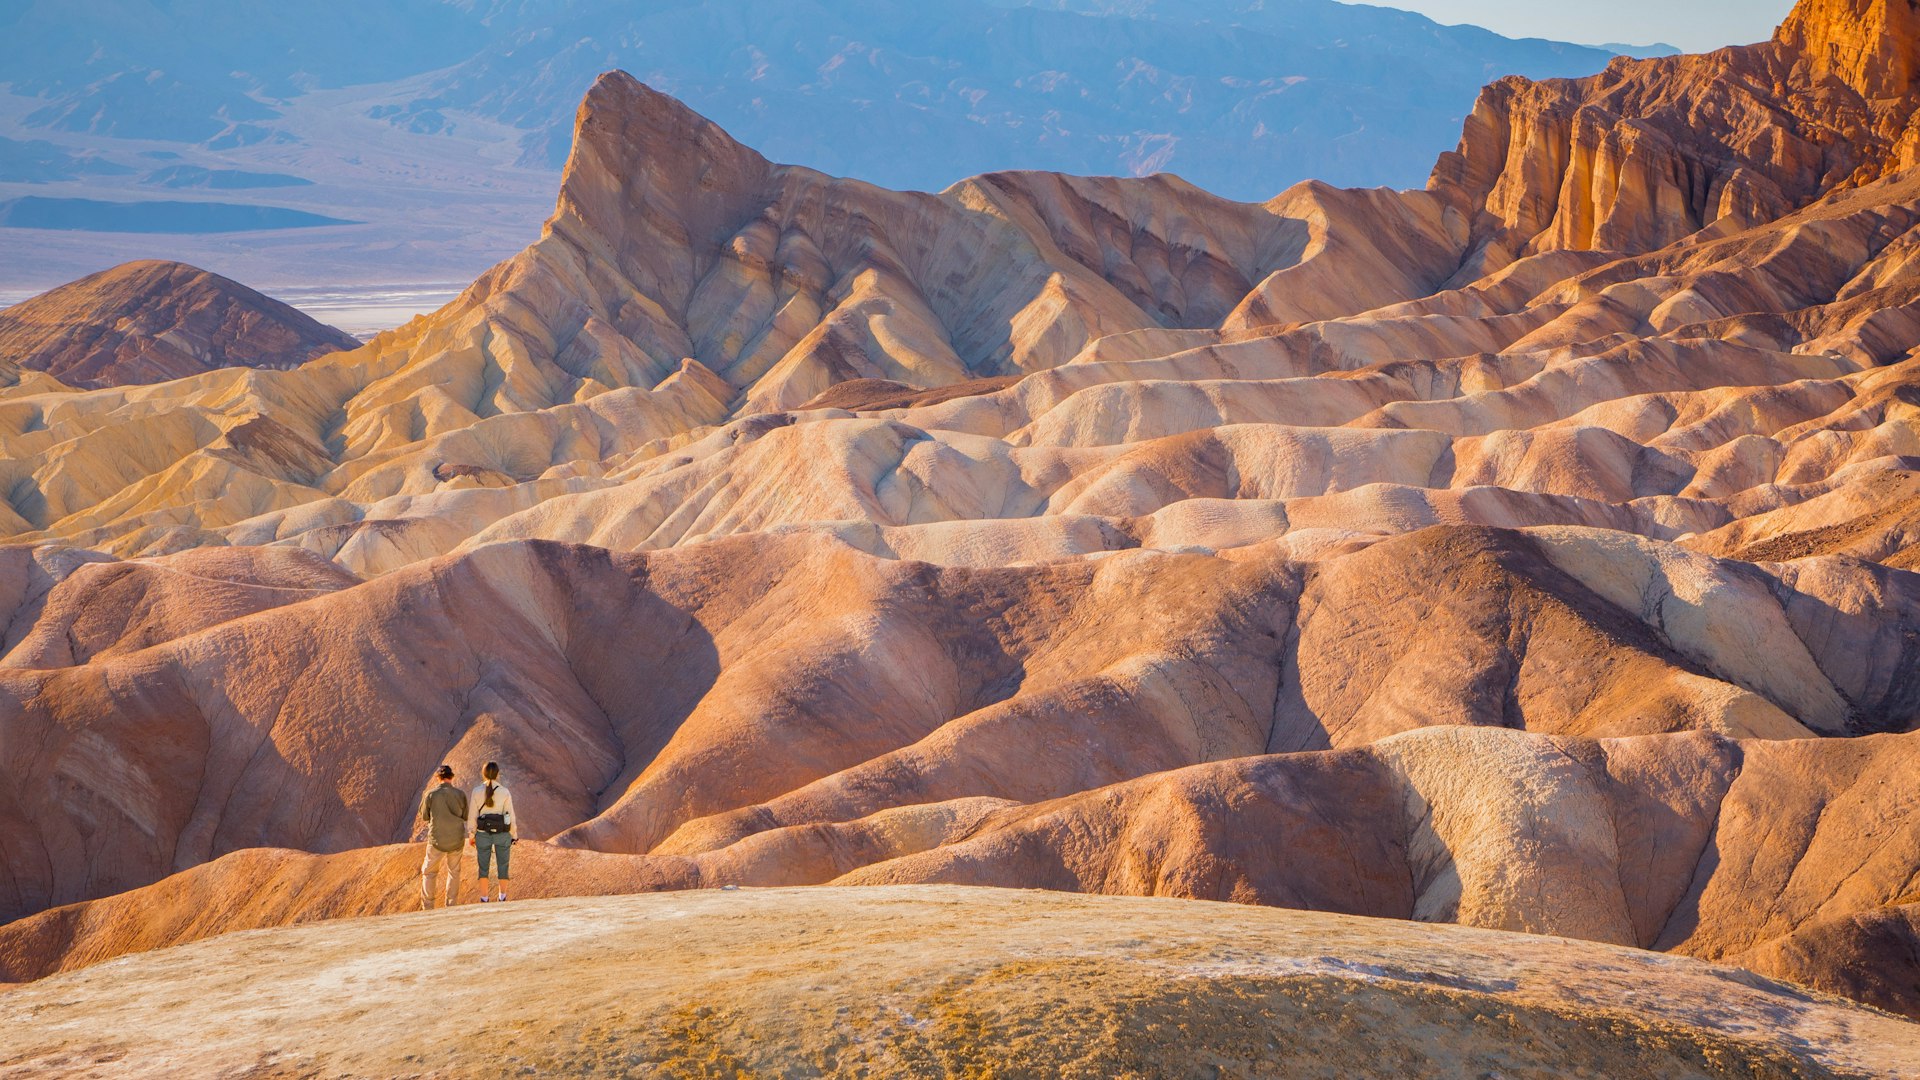 Two people stand amid the rocky, rumpled landscape of Death Valley National Park, looking tiny in comparison the the peaks